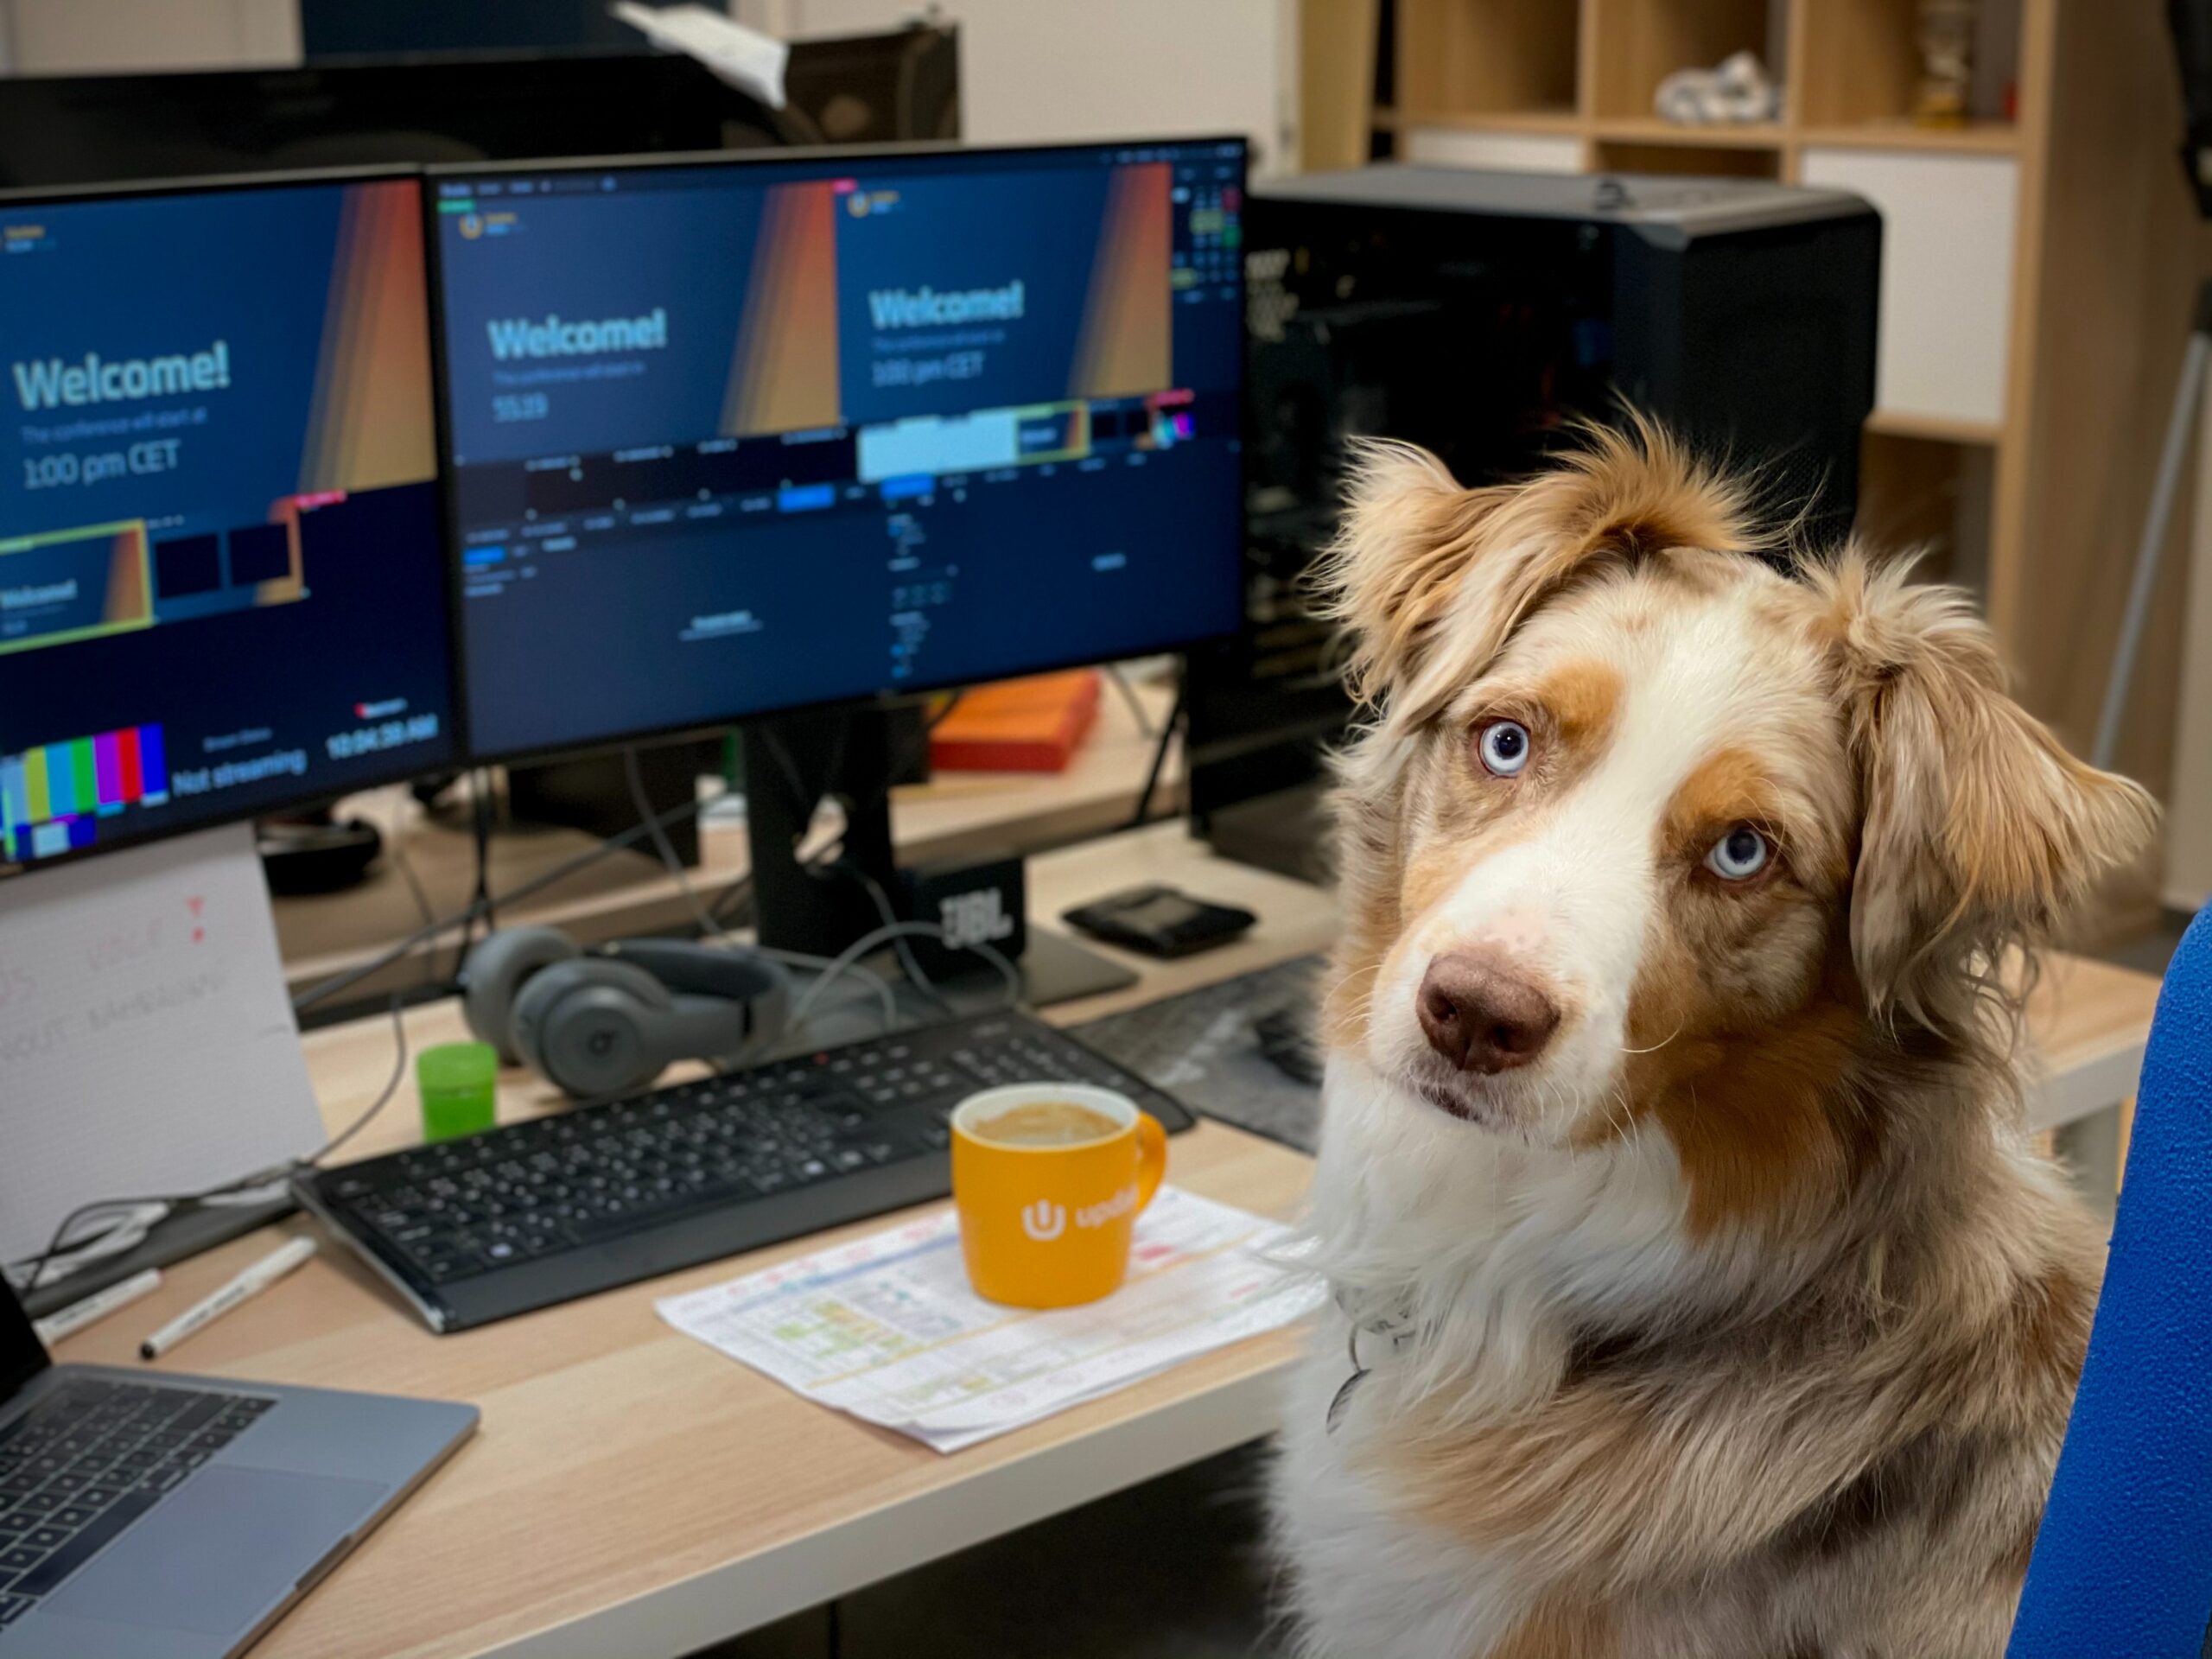 Design tips for Pet Parents: How to Make Your Office Dog-Friendly